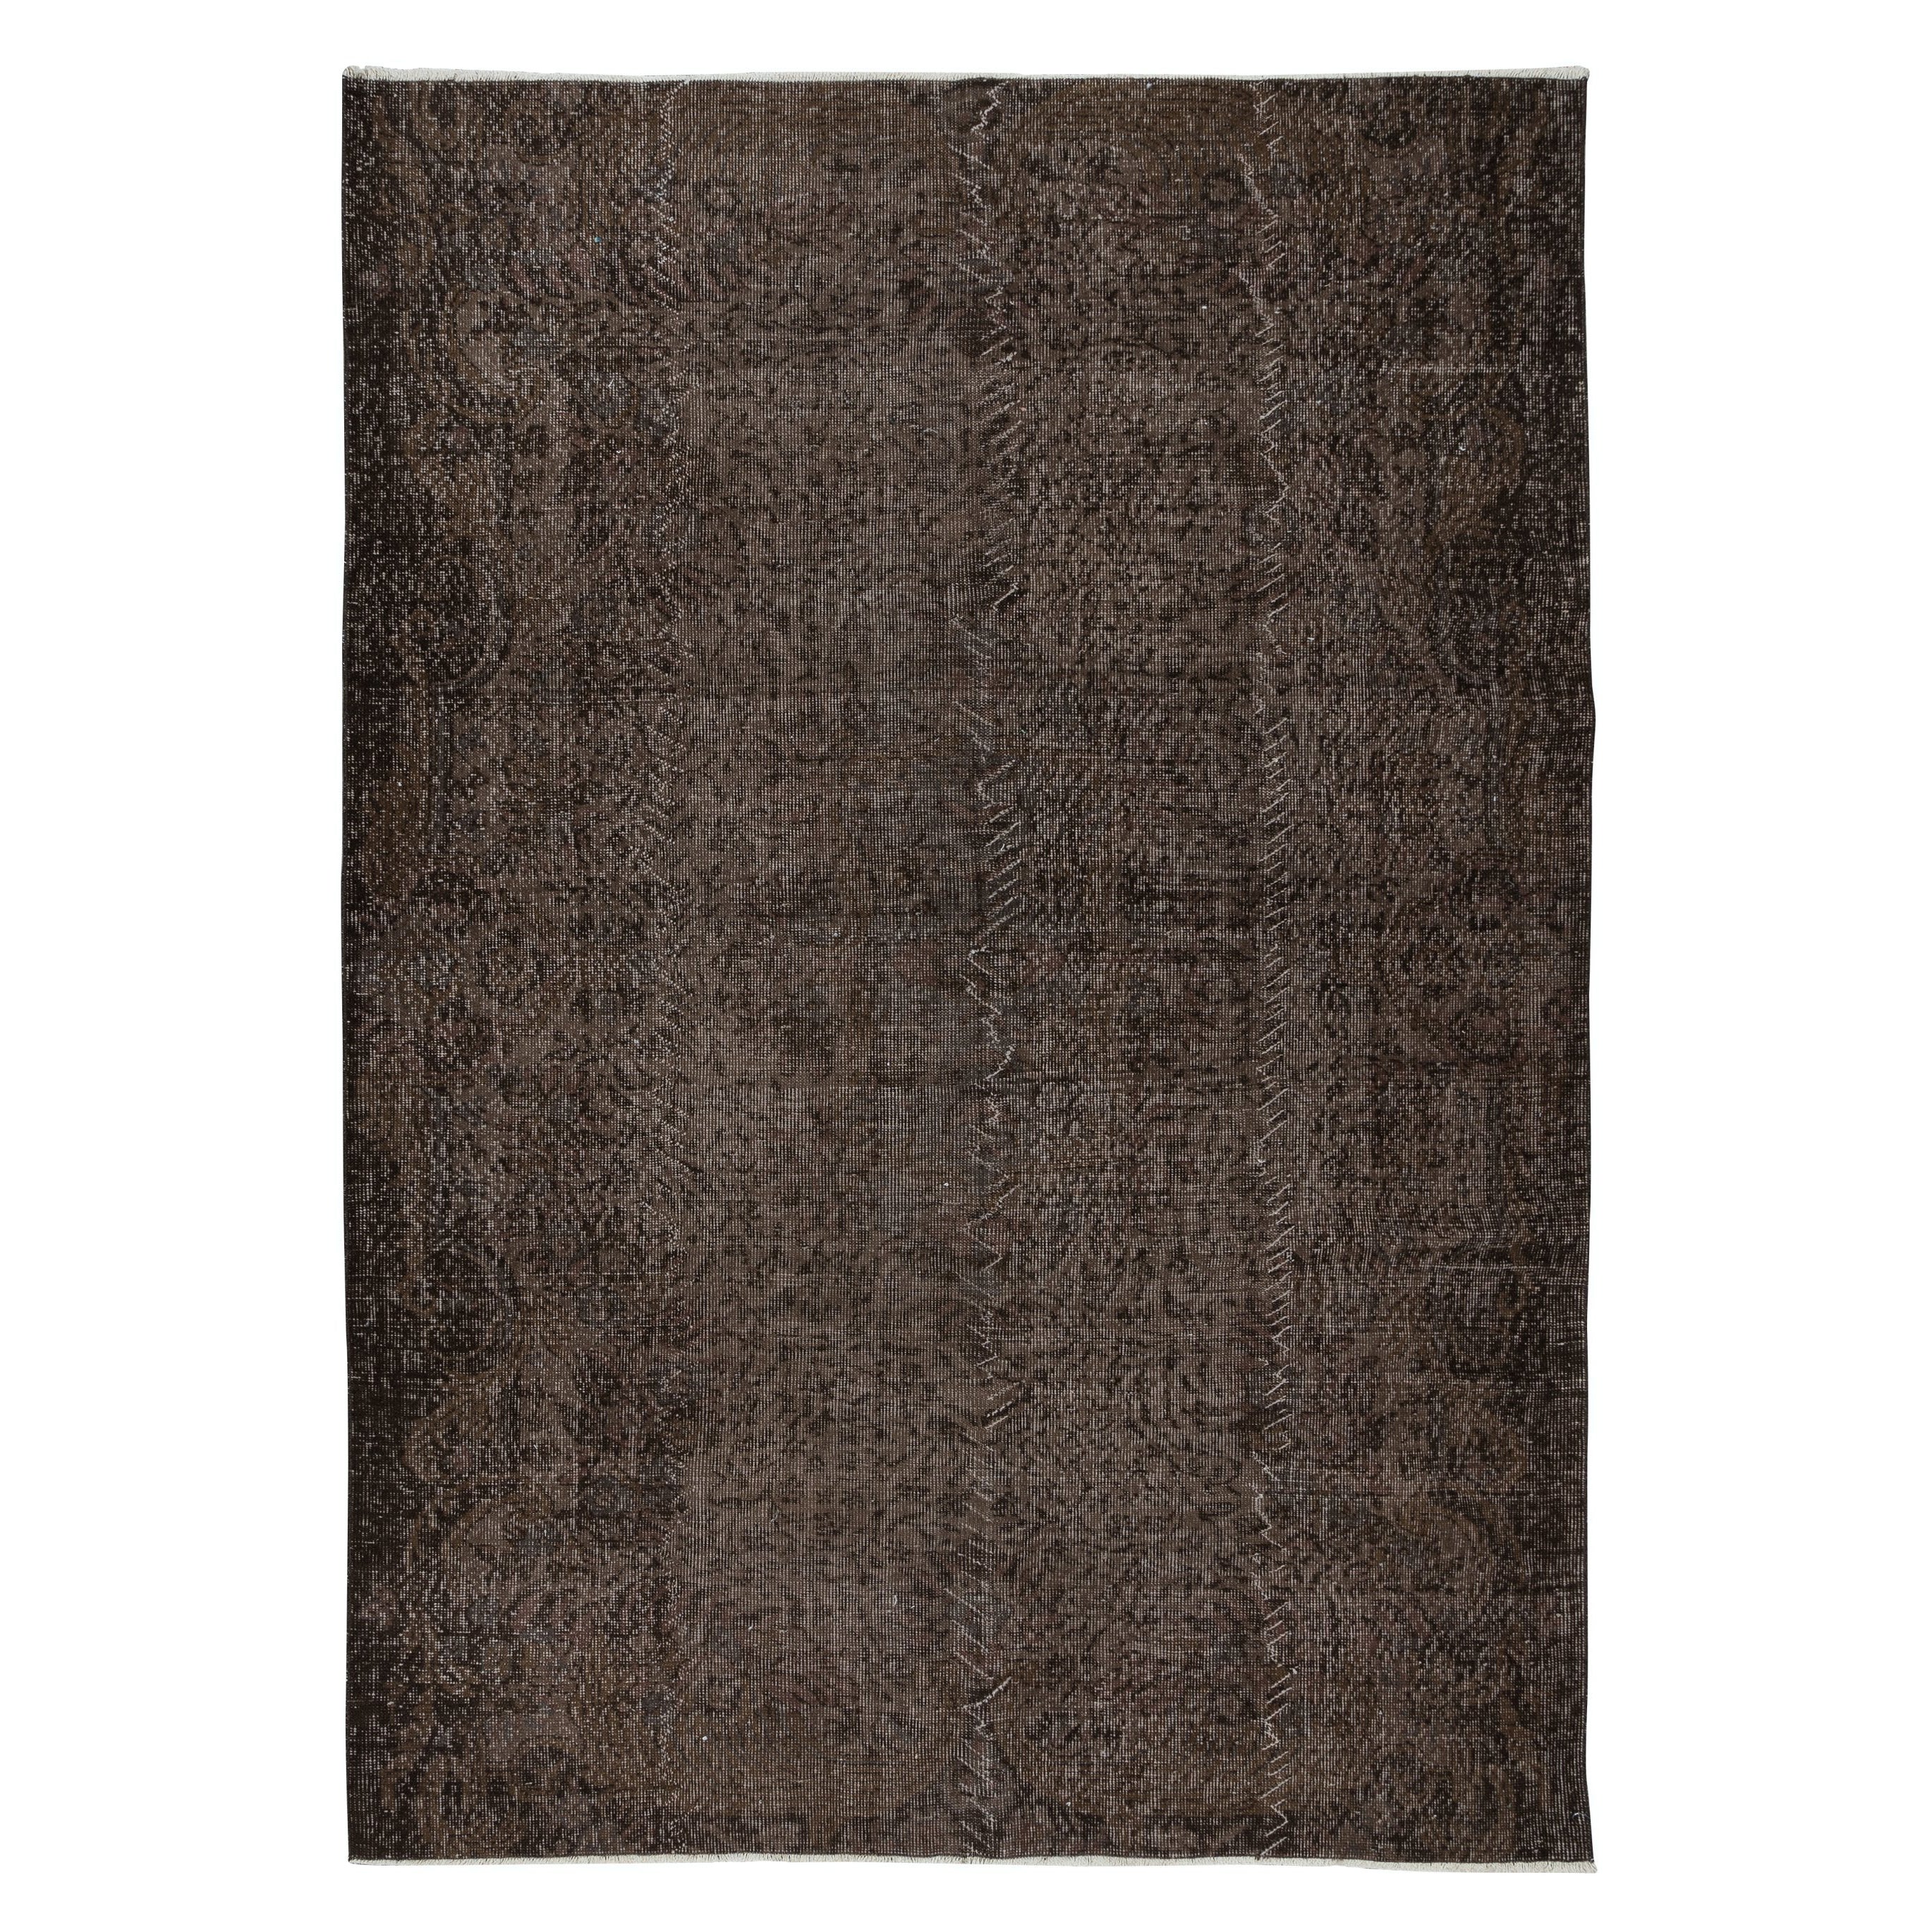 6x8.4 Ft Brown Solid Modern Area Rug for Modern Interiors, Handknotted in Turkey